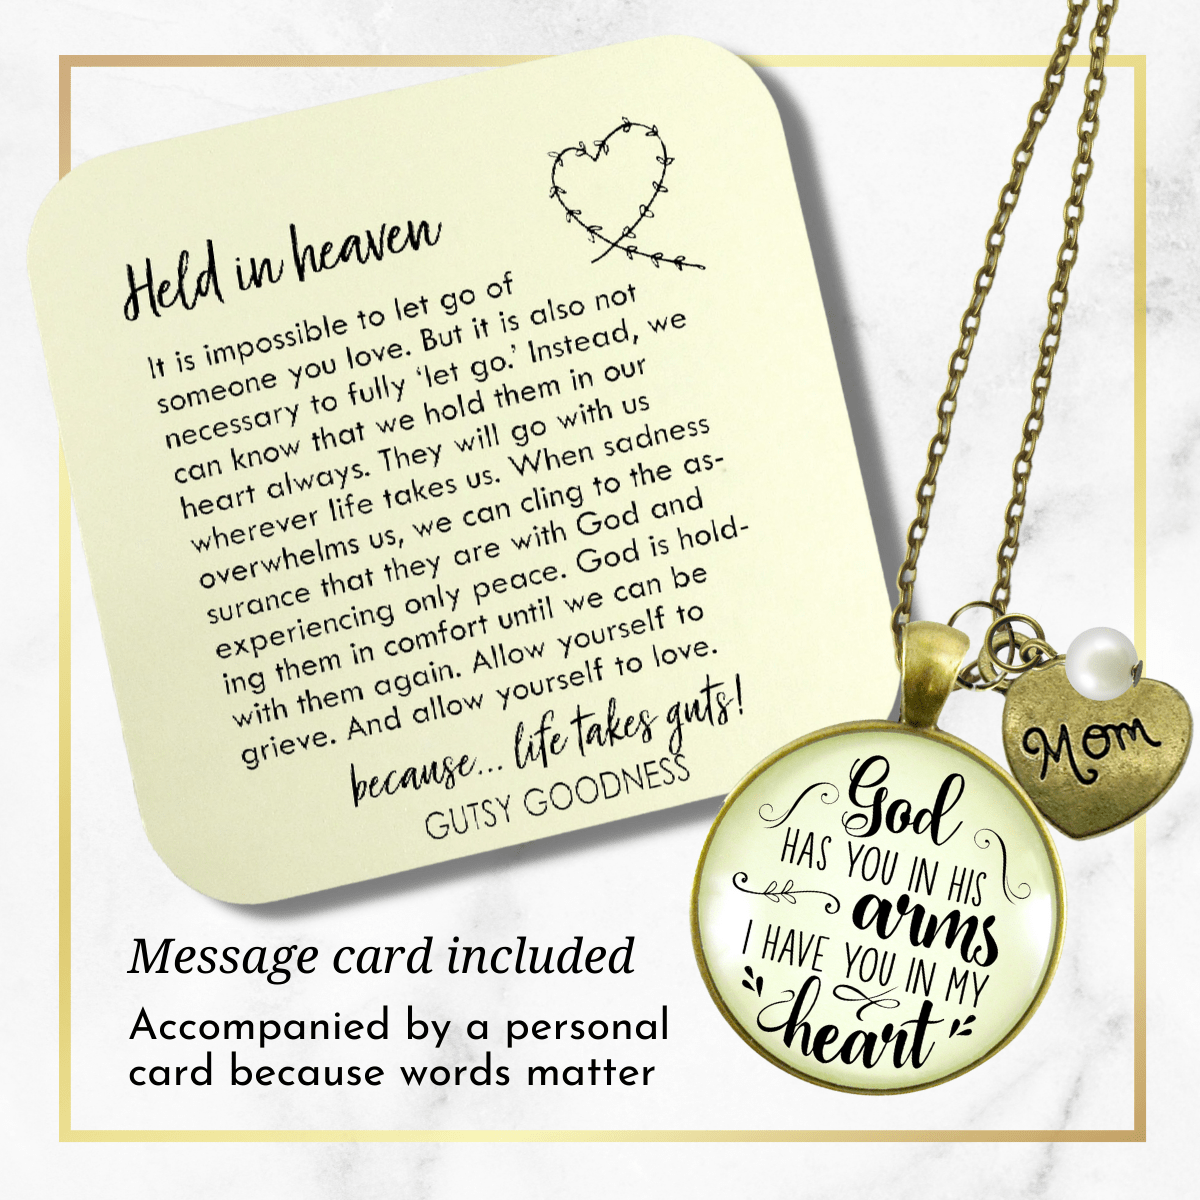 Gutsy Goodness Mom Memorial Necklace God Has You In His Arms Mother Heart Charm Remembrance Gift - Gutsy Goodness;Mom Memorial Necklace God Has You In His Arms Mother Heart Charm Remembrance Gift - Gutsy Goodness Handmade Jewelry Gifts